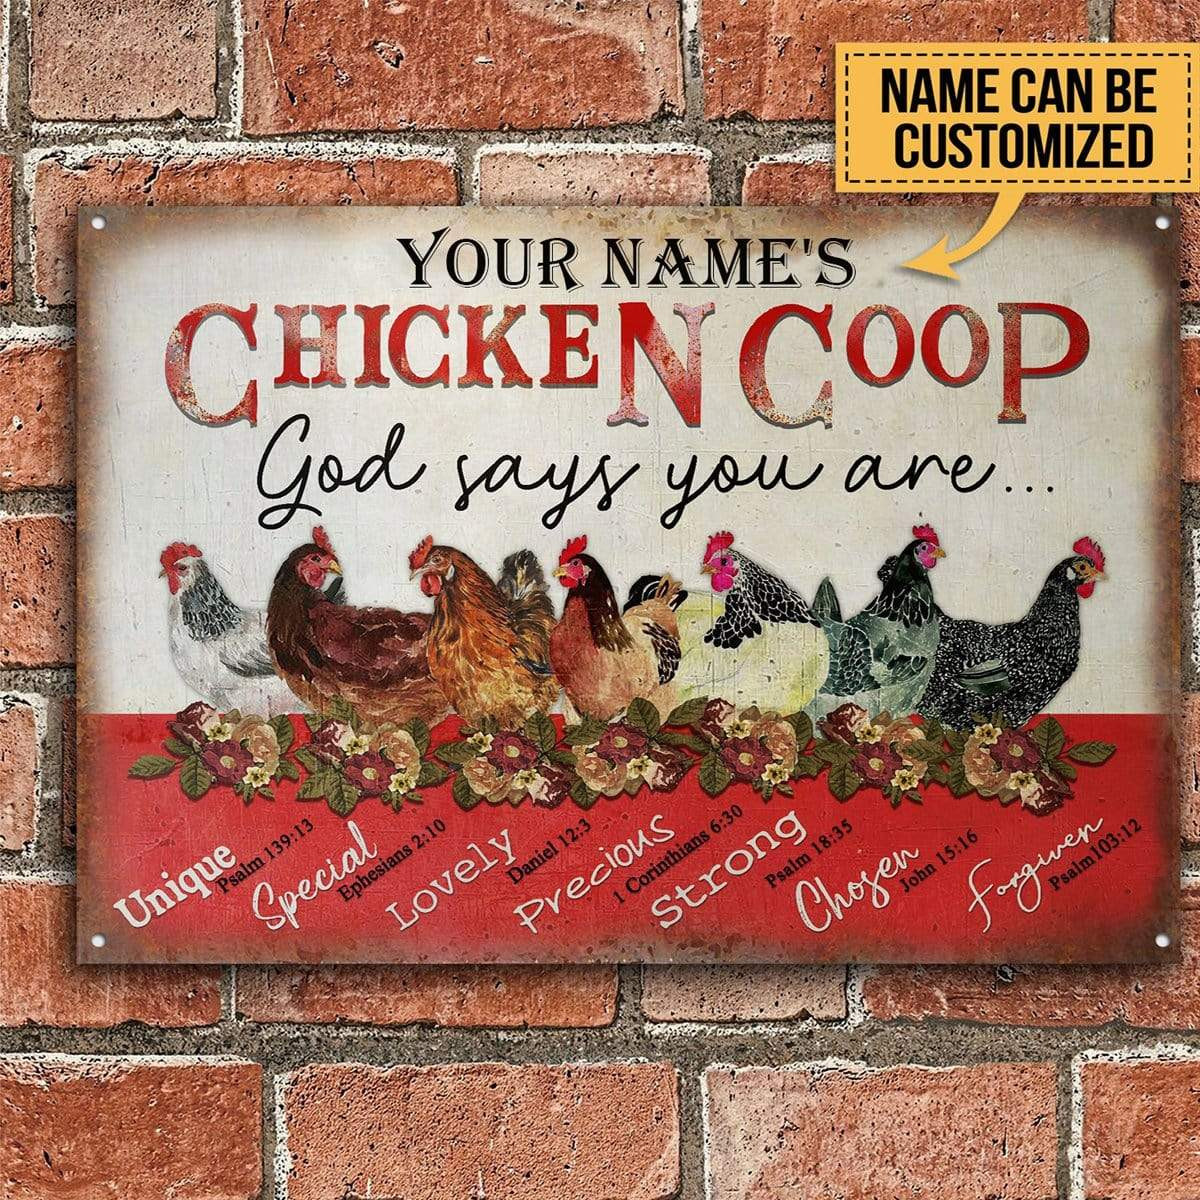 Personalized Chicken Coop God Says Customized Classic Metal Signs